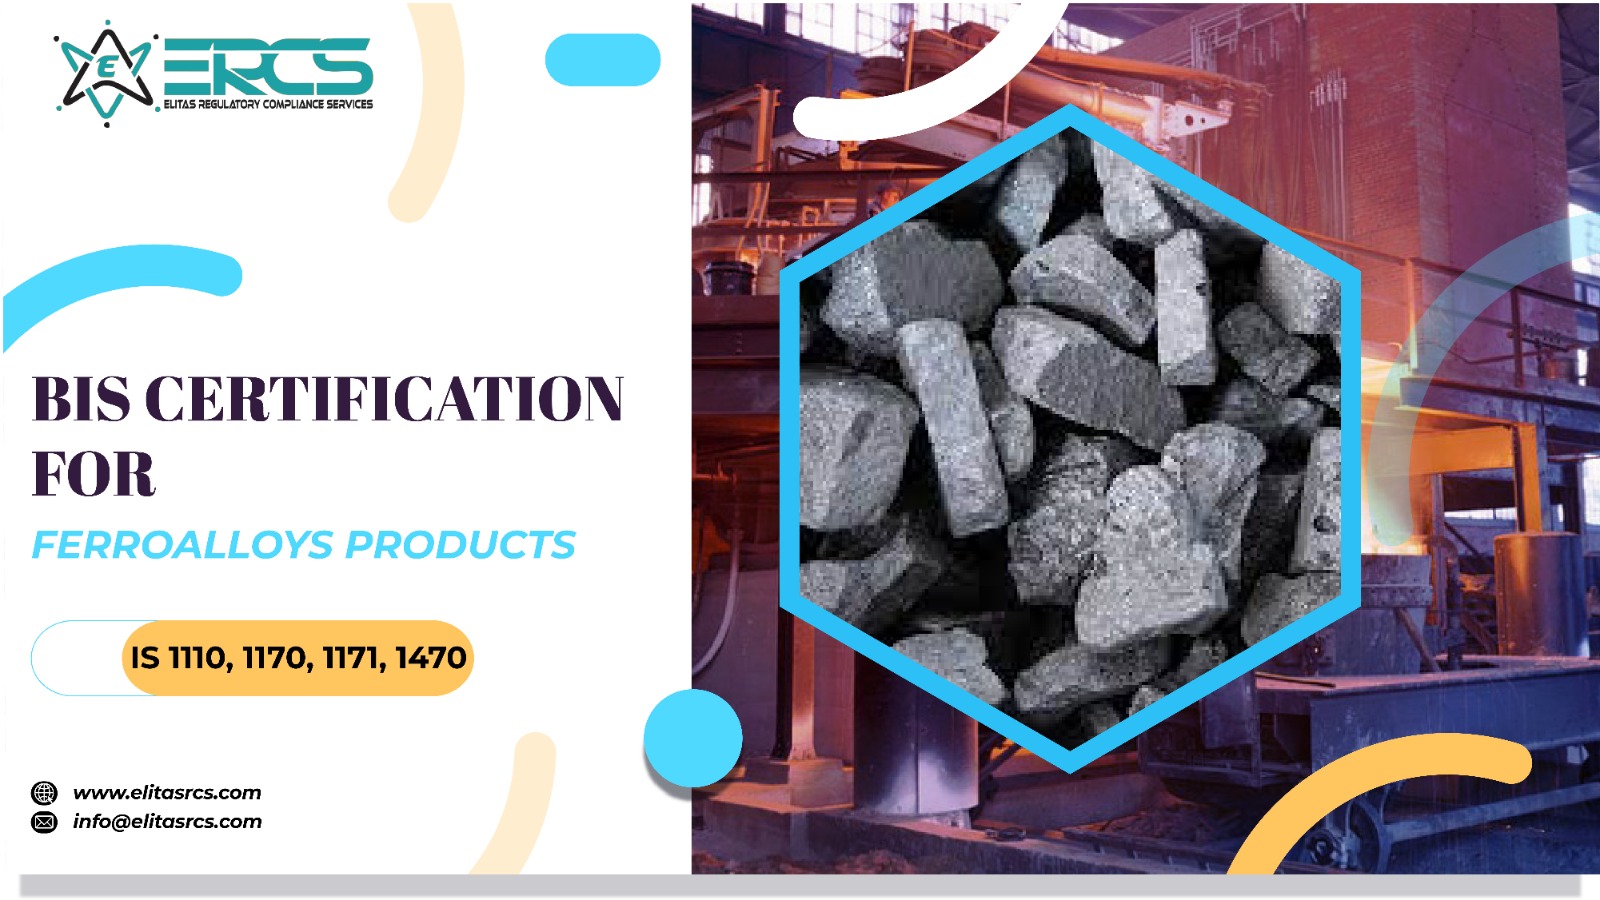 BIS Certification for Ferroalloys Products